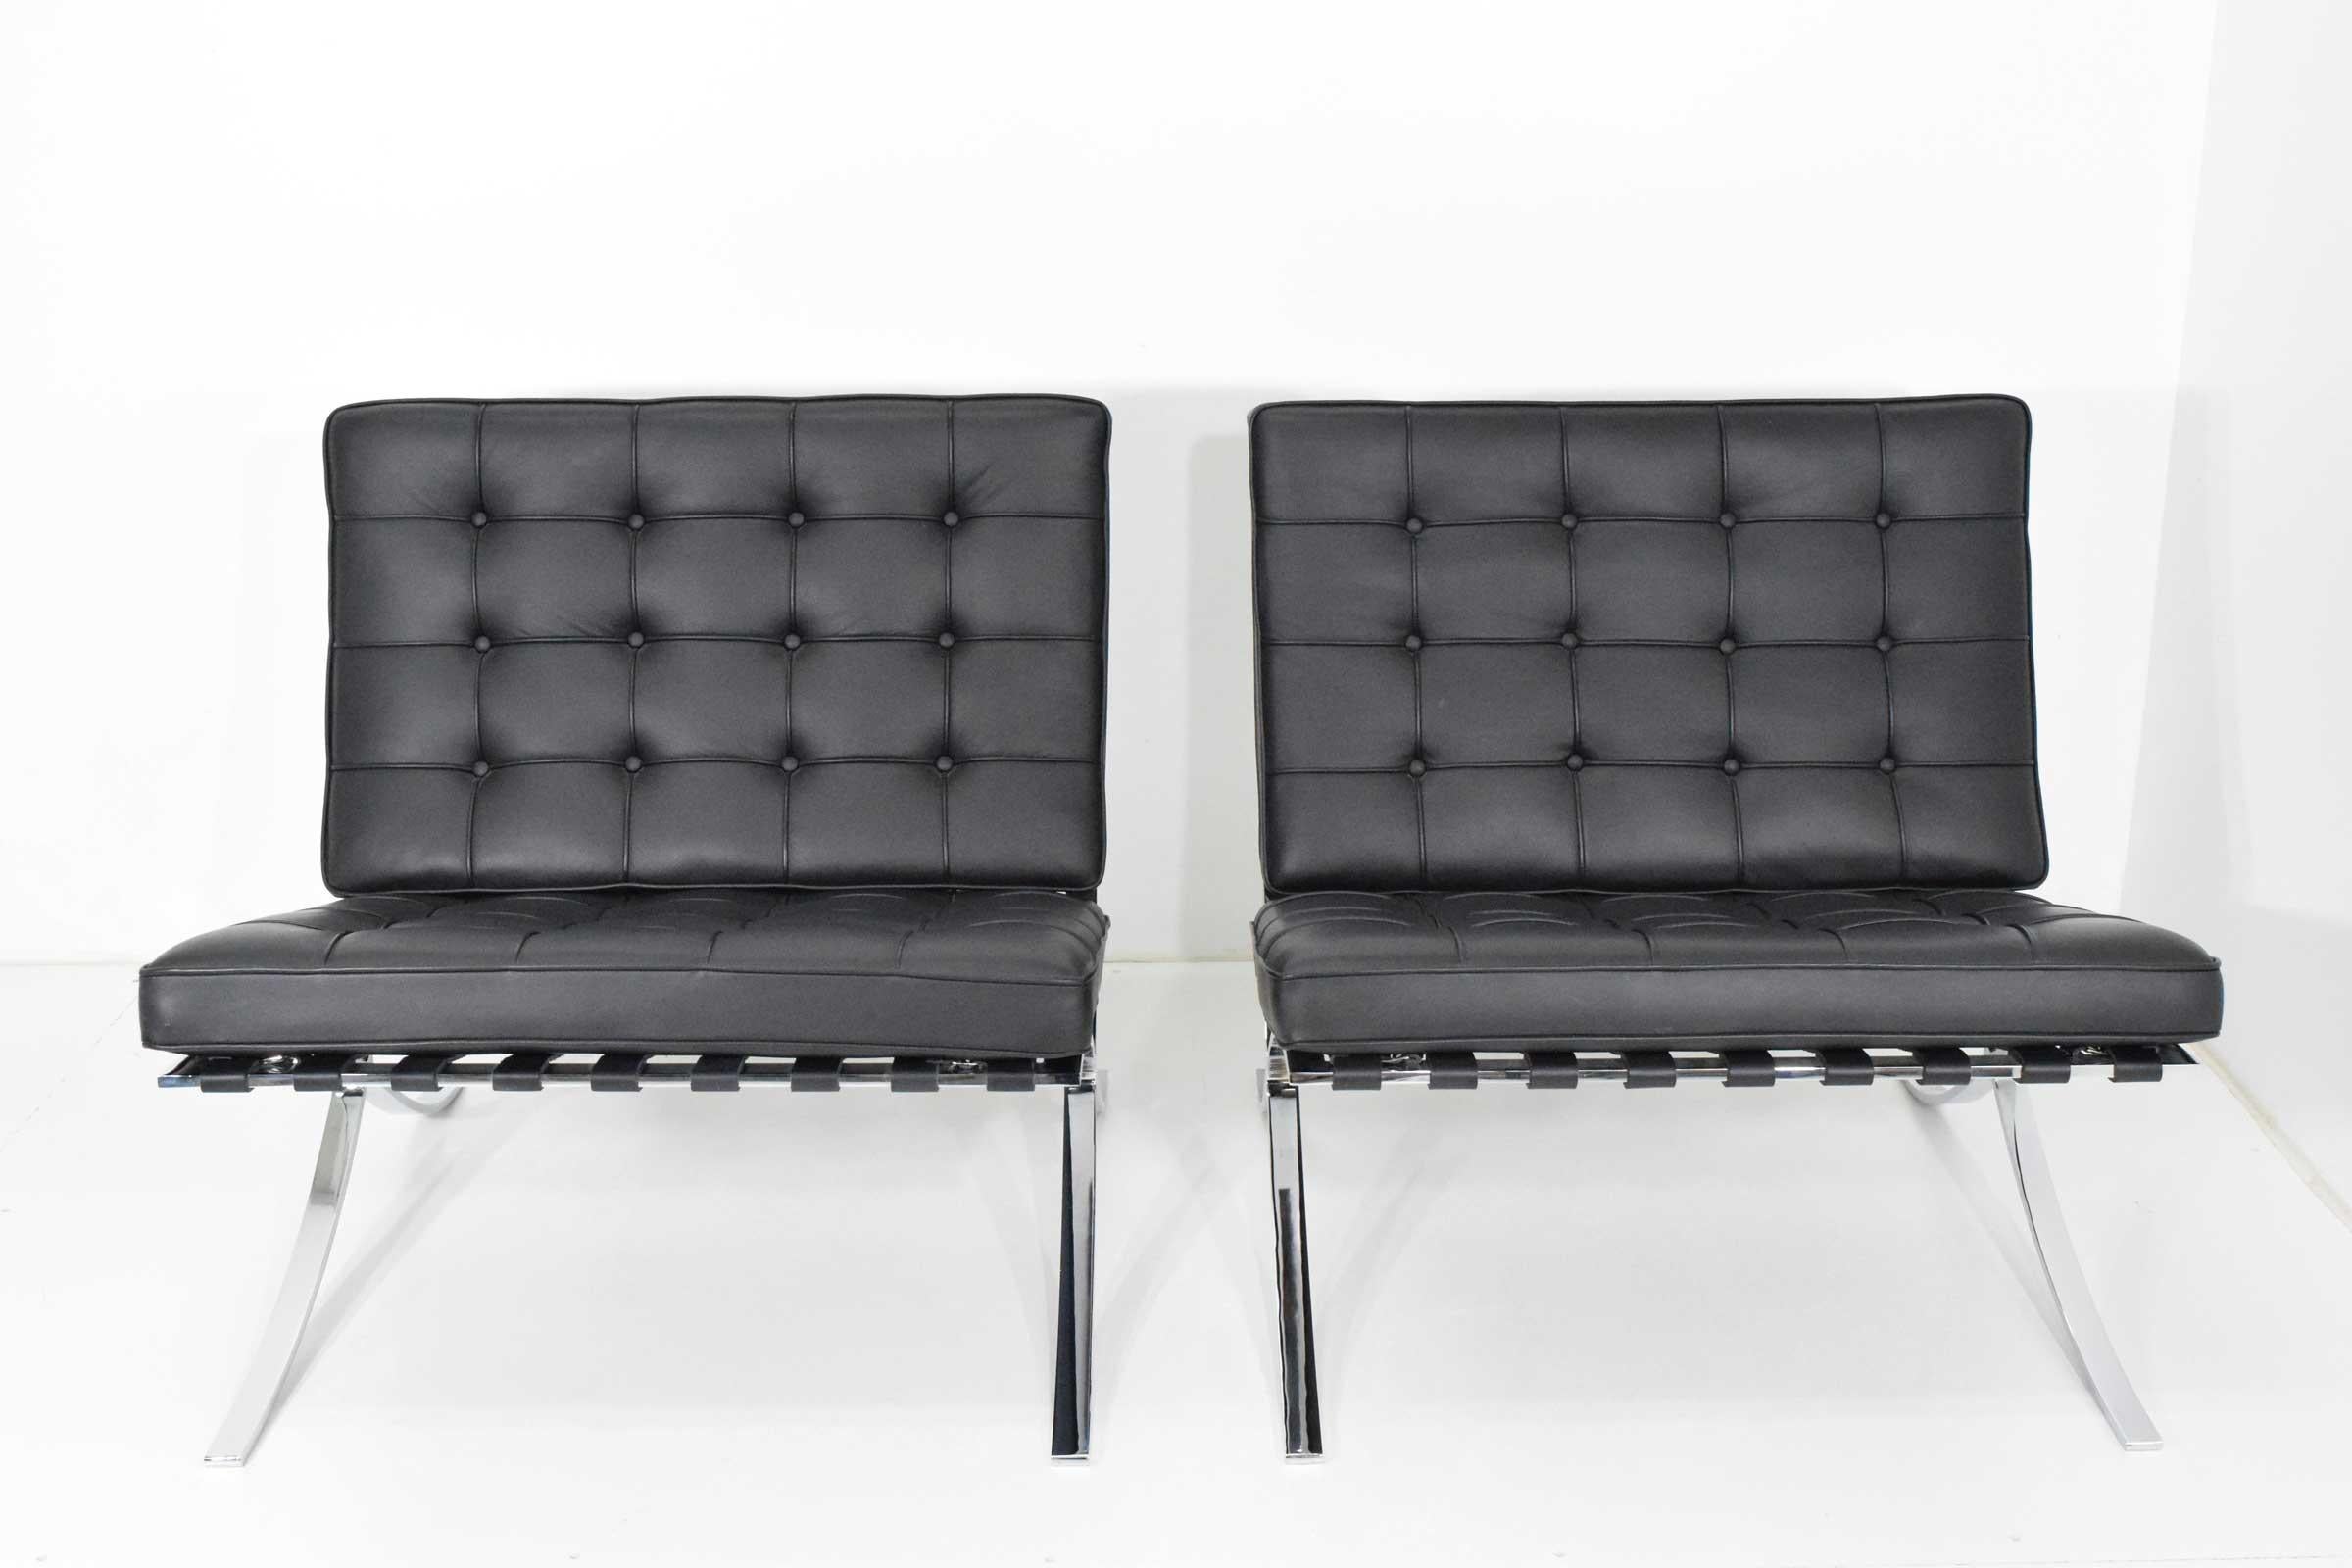 Like new pair of Knoll Barcelona chairs designed by Mies van der Rohe. Stamped with Knoll Studio stamp in each leg. Chairs are in great condition. Black leather.